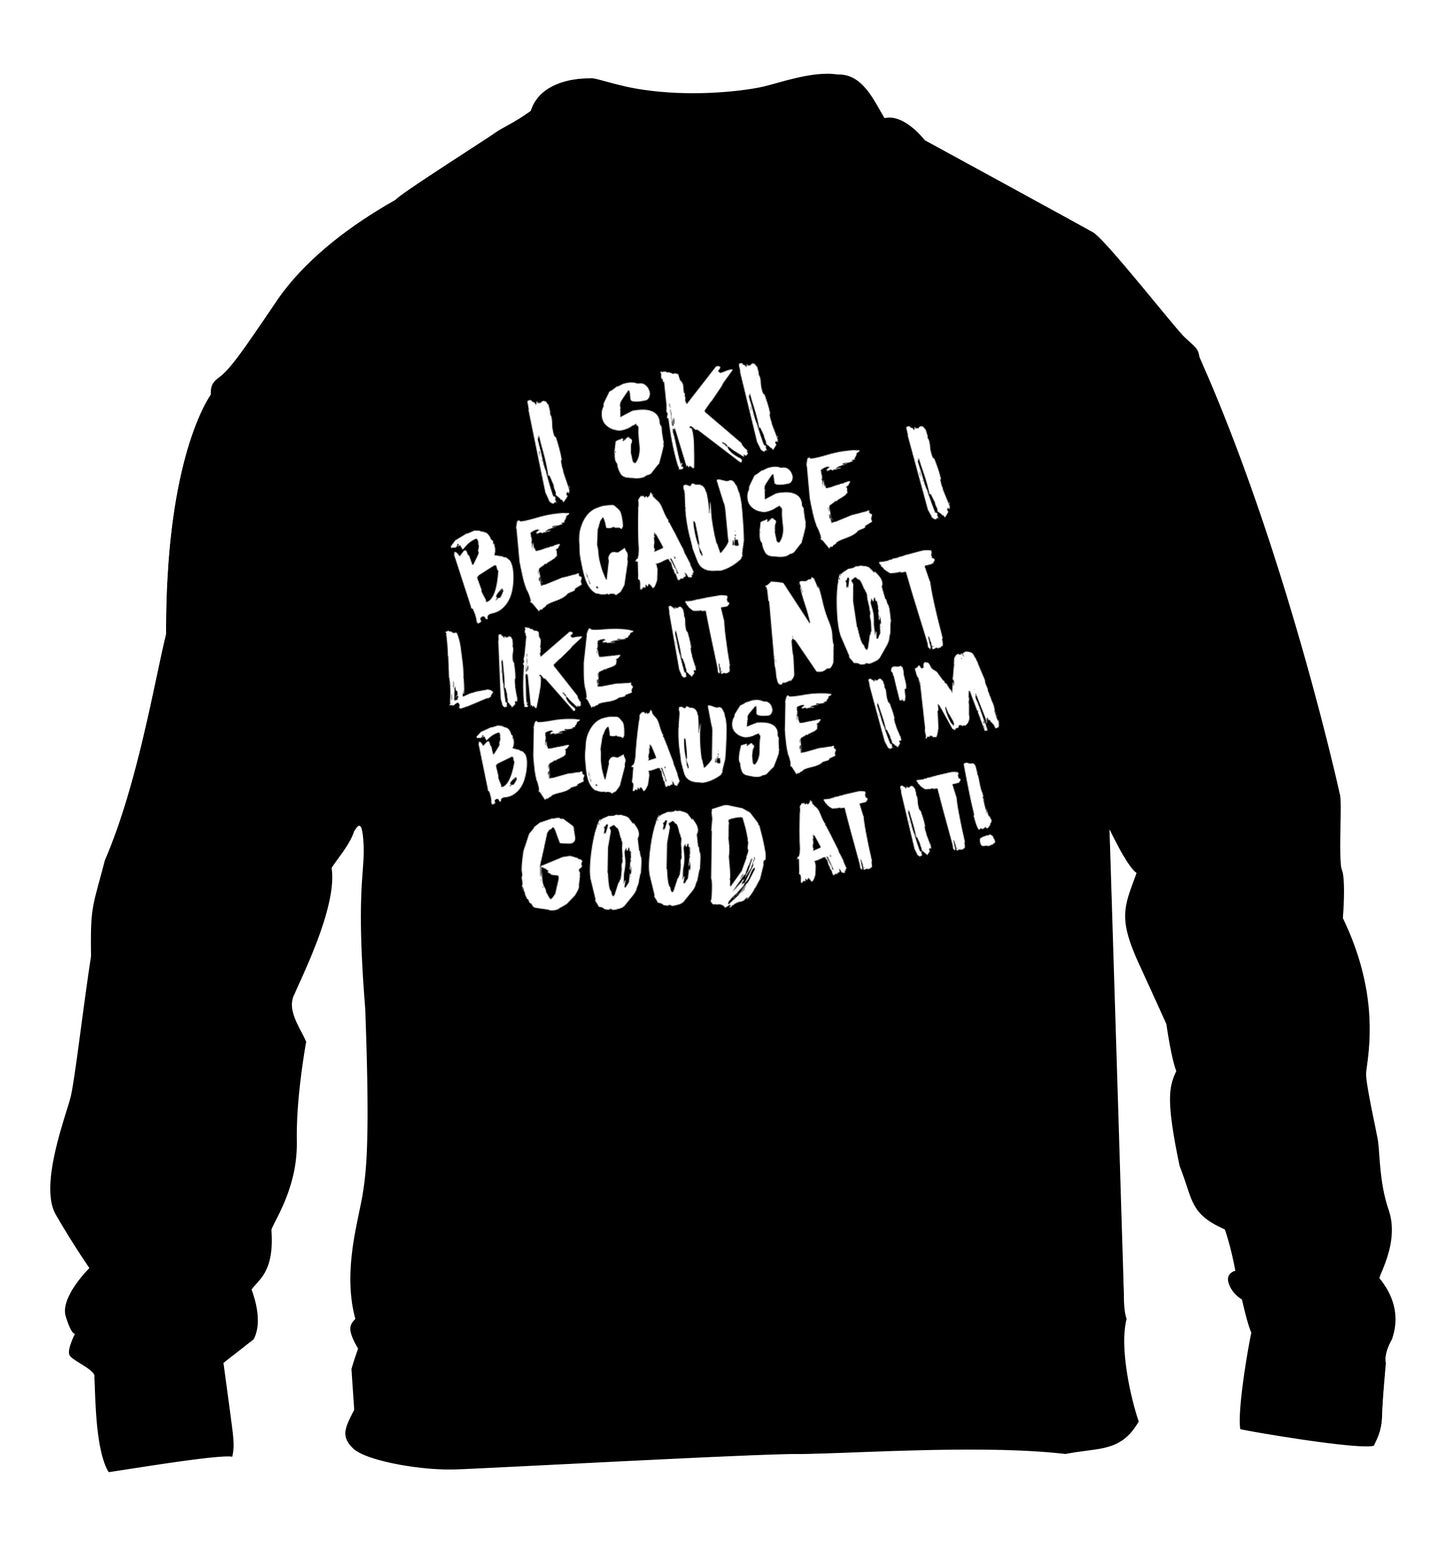 I ski because I like it not because I'm good at it children's black sweater 12-14 Years